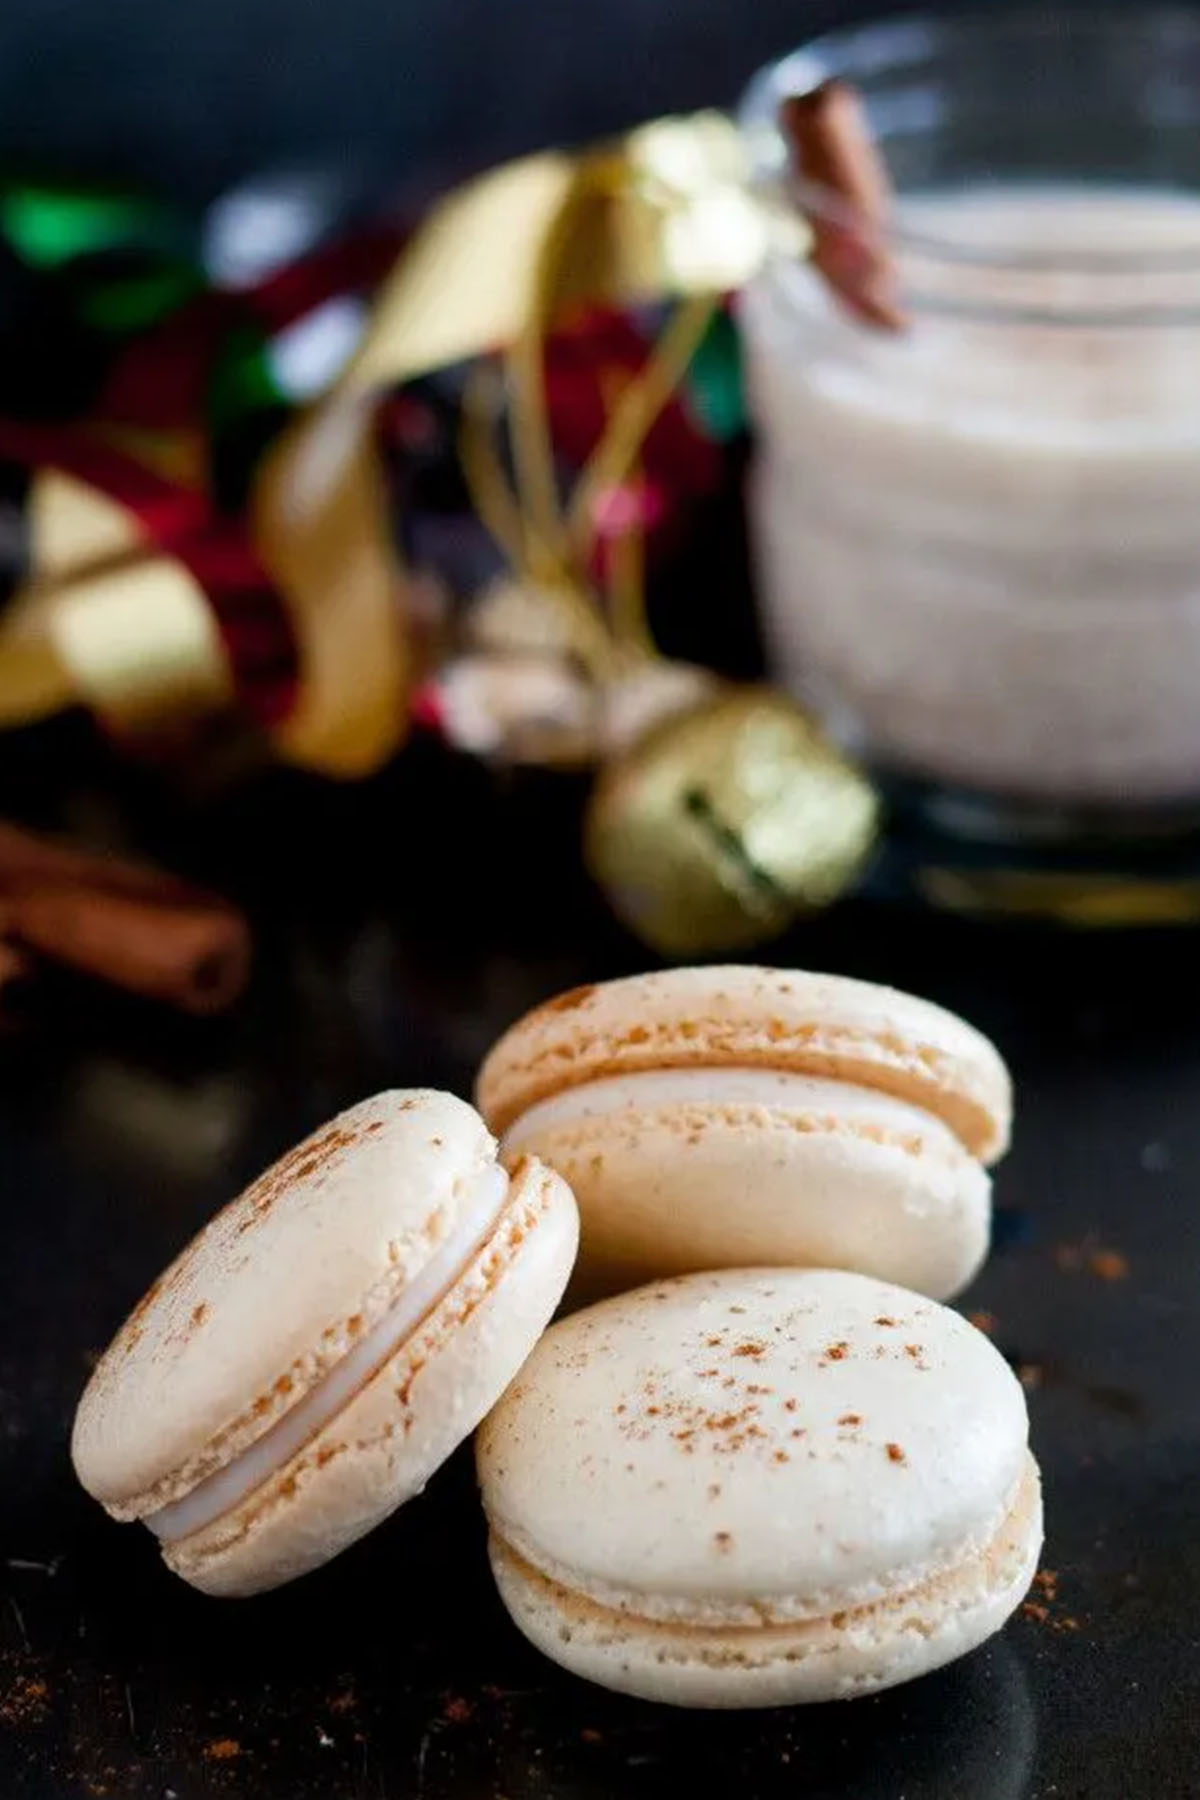 egg nog flavored white macaron shells dusted with cinnamon.